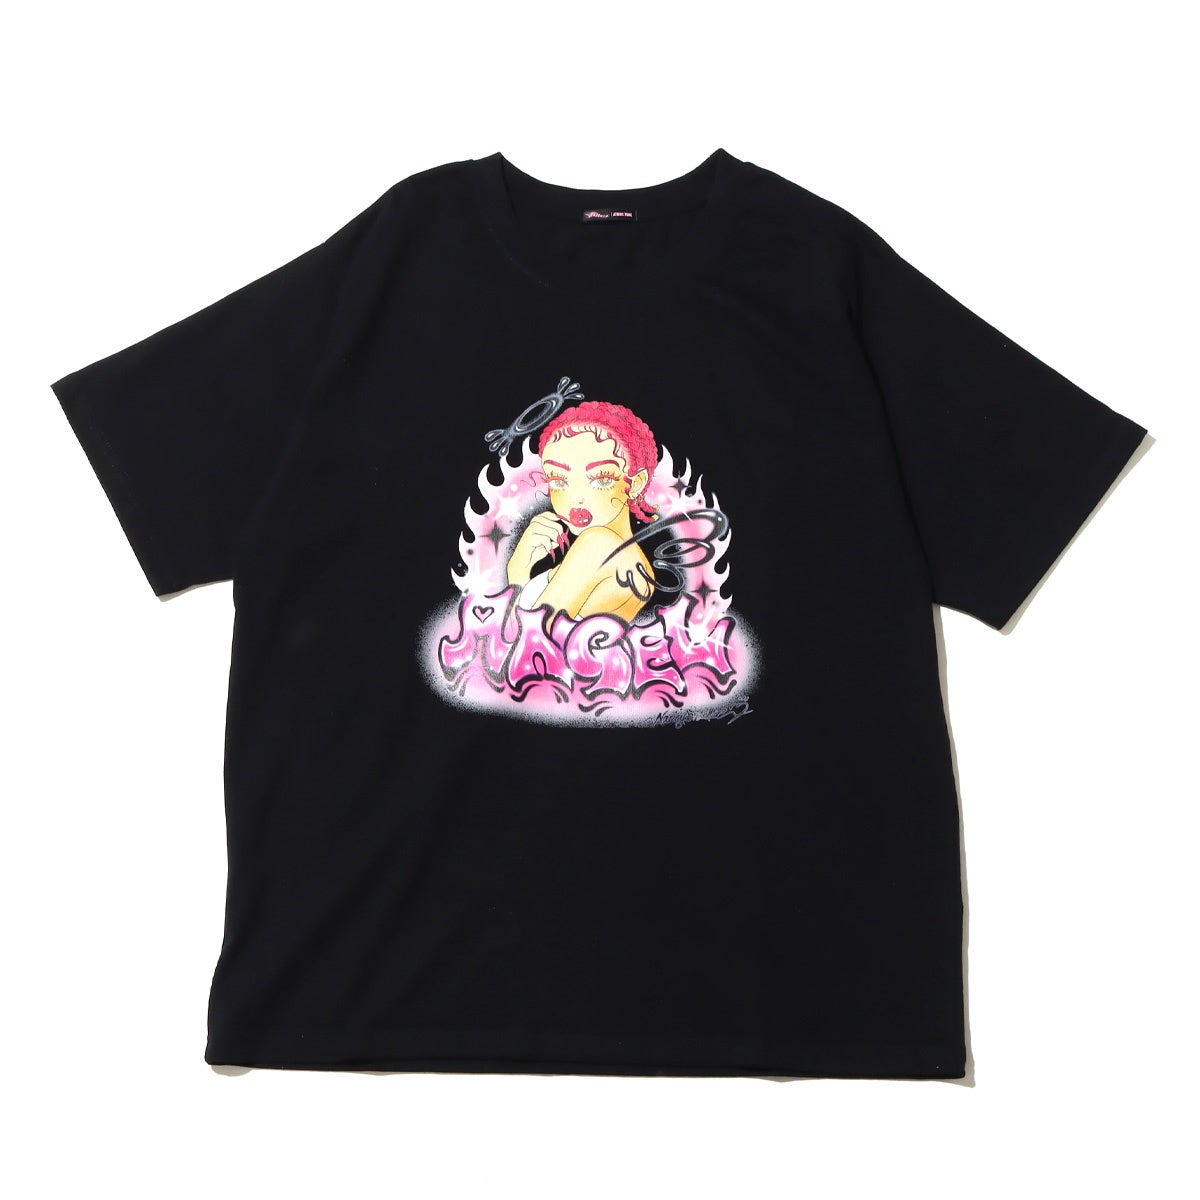 RIEHATA × atmos pink 22AW APPAREL COLLECTION 待望のコラボレーションアイテムが今季も登場！のサブ画像3